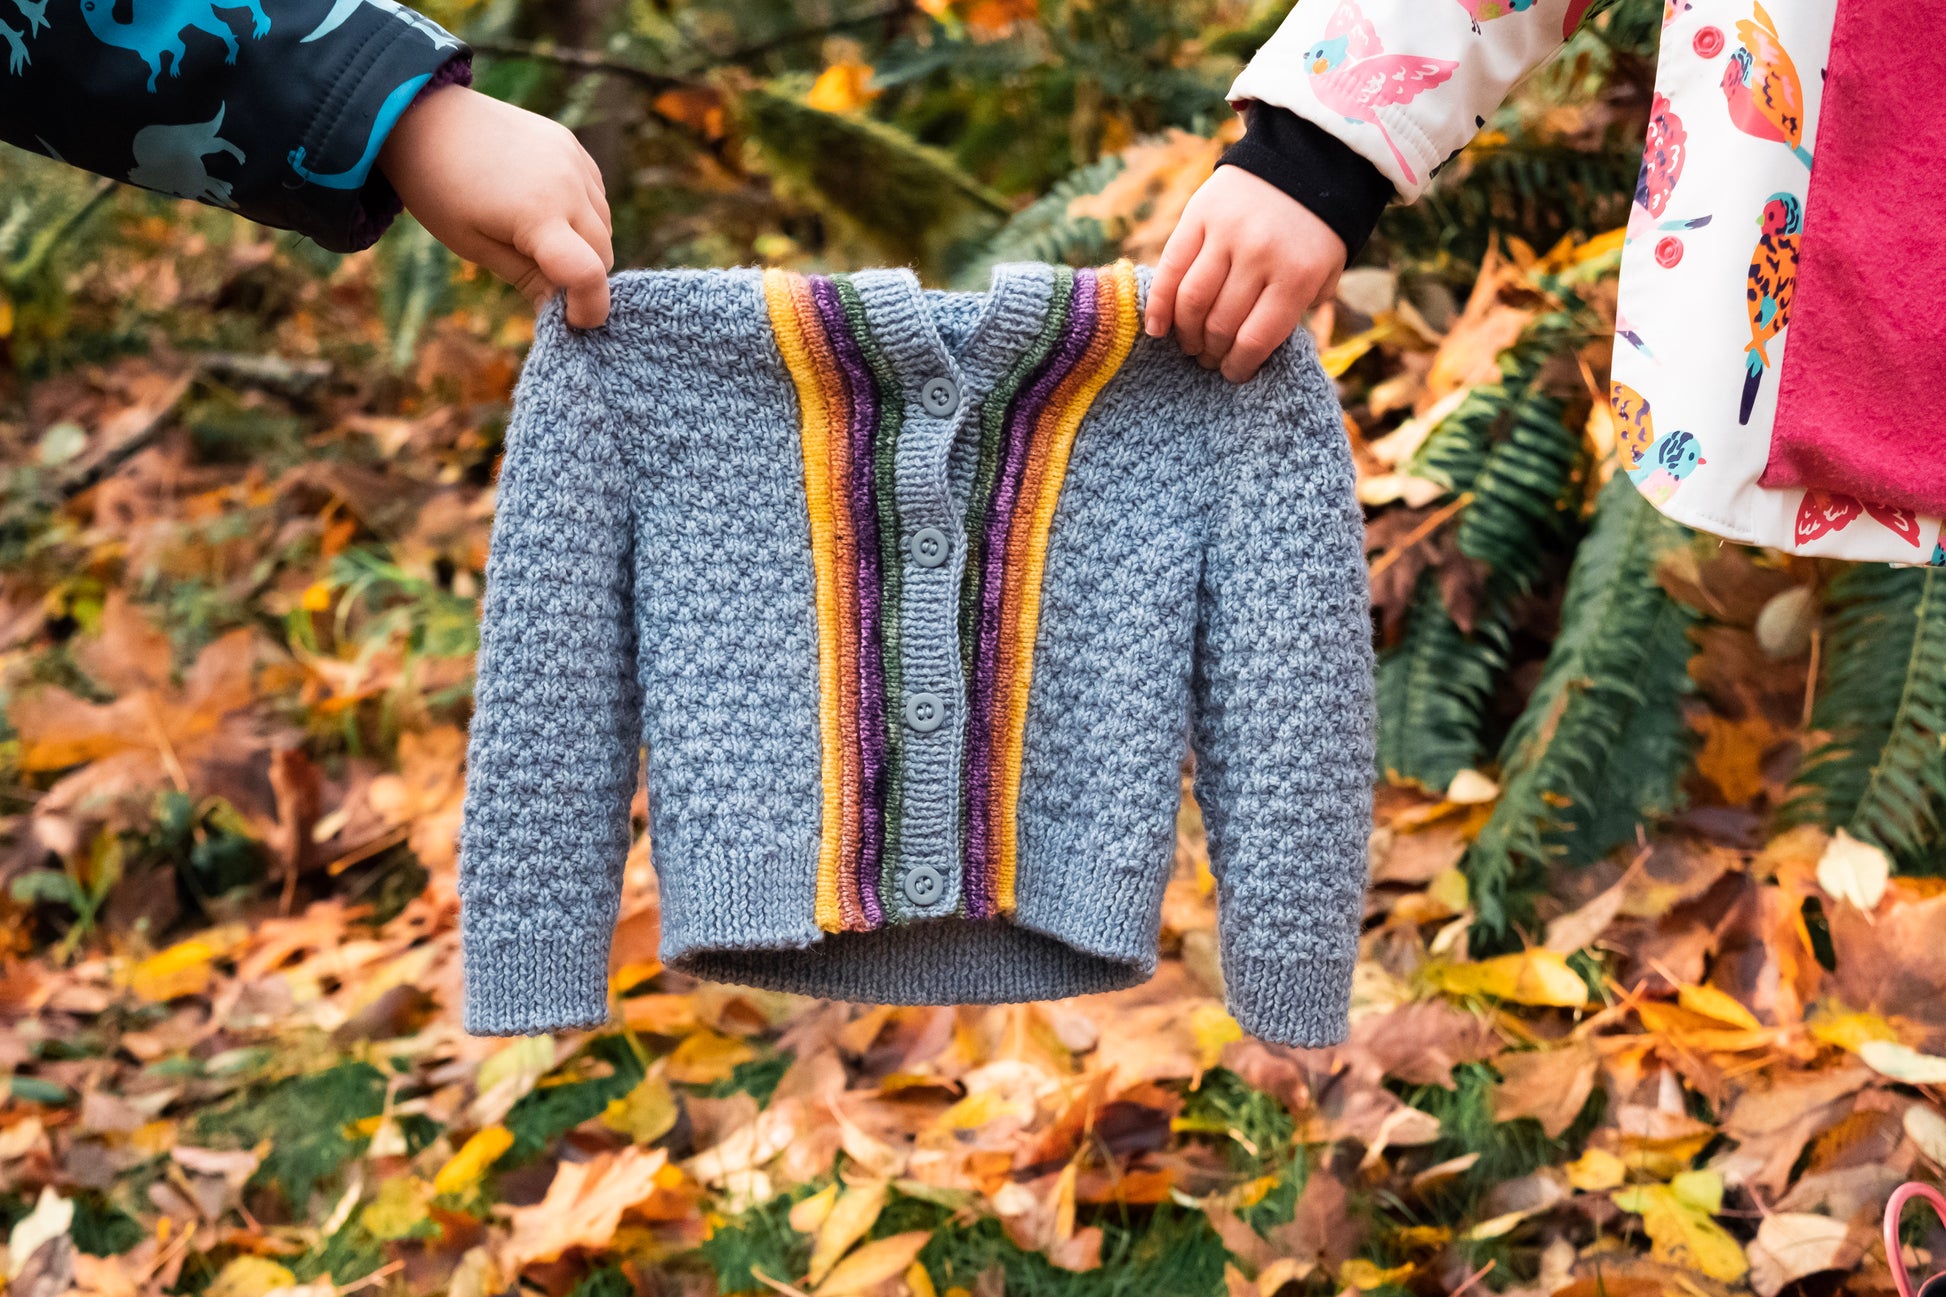 Seen close up, two kid's hold a light blue, moss stitch sweater, featuring plackets around the button band.